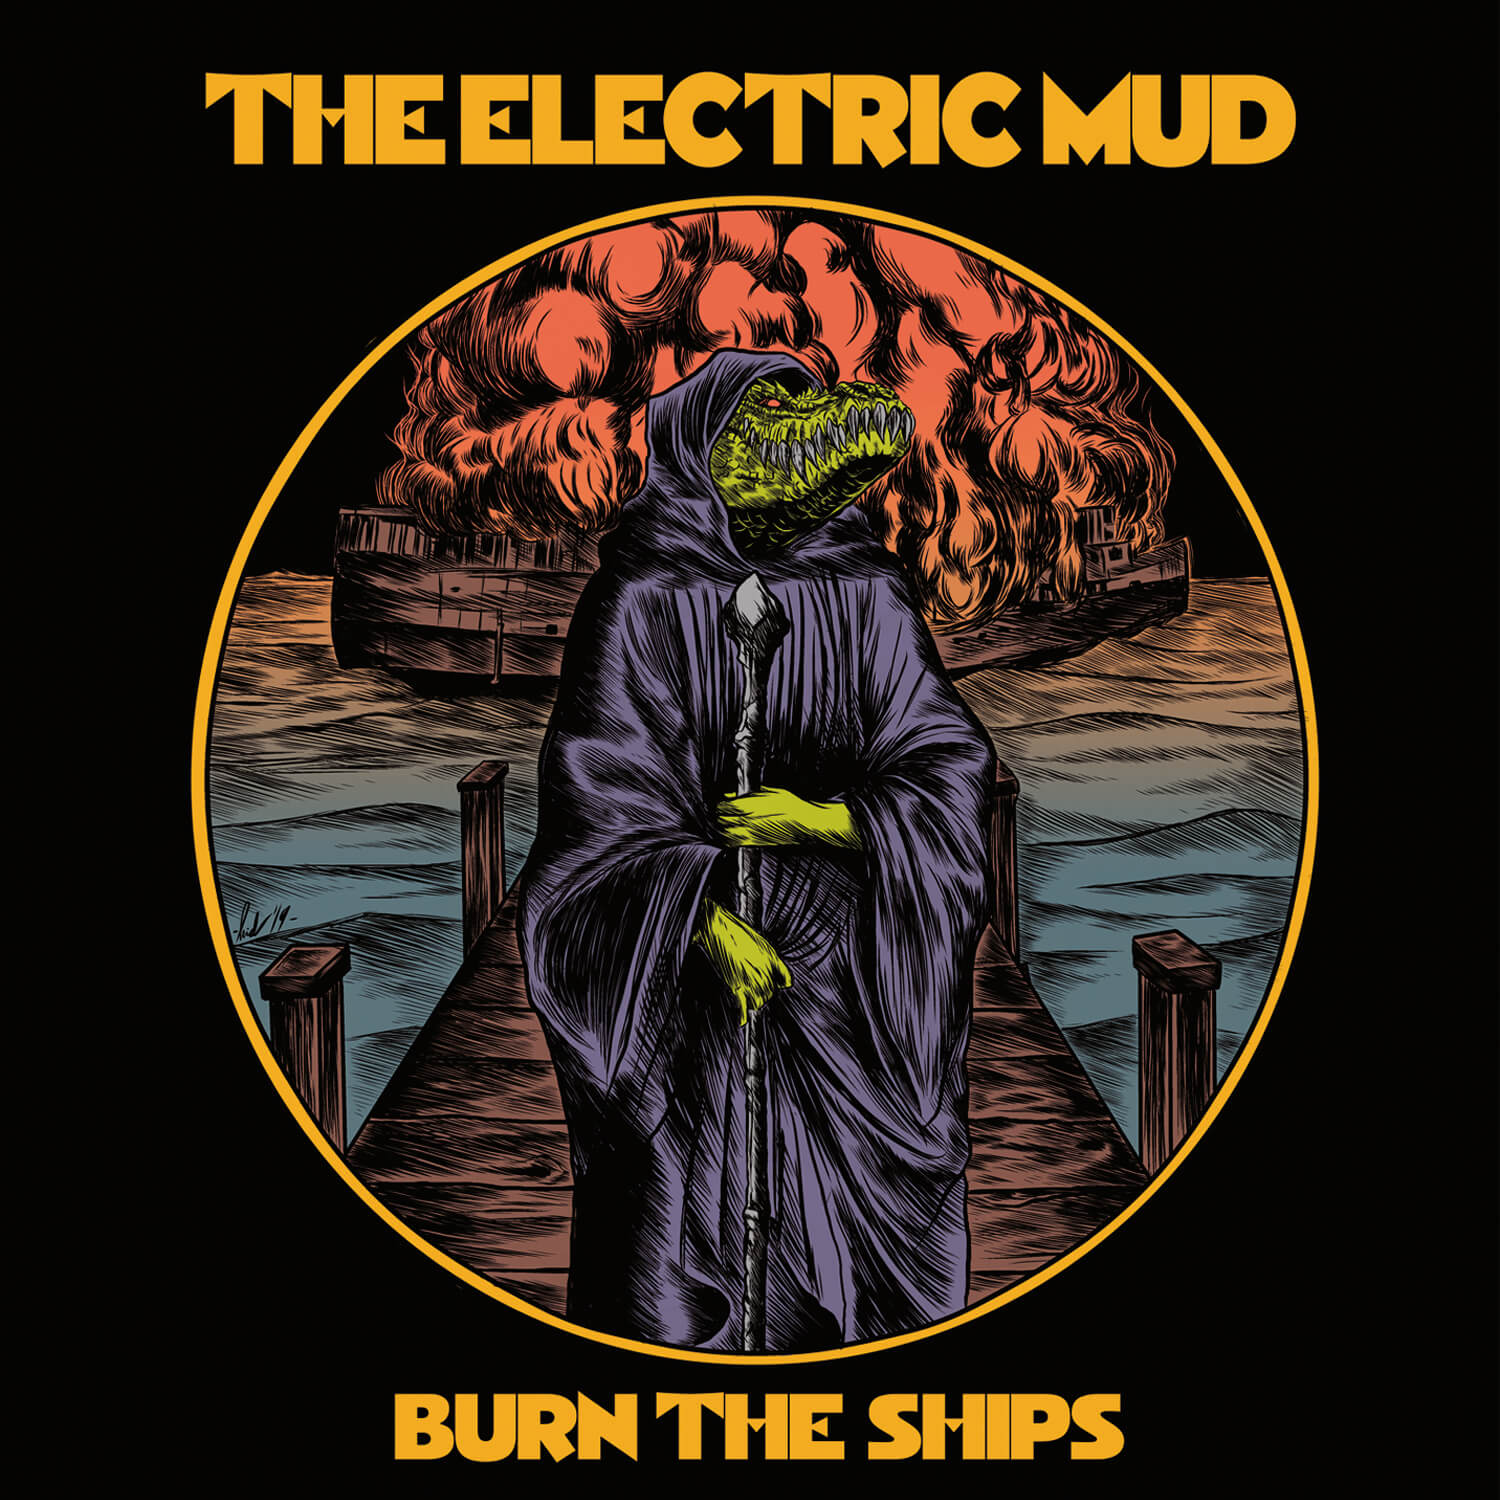 The Electric Mud